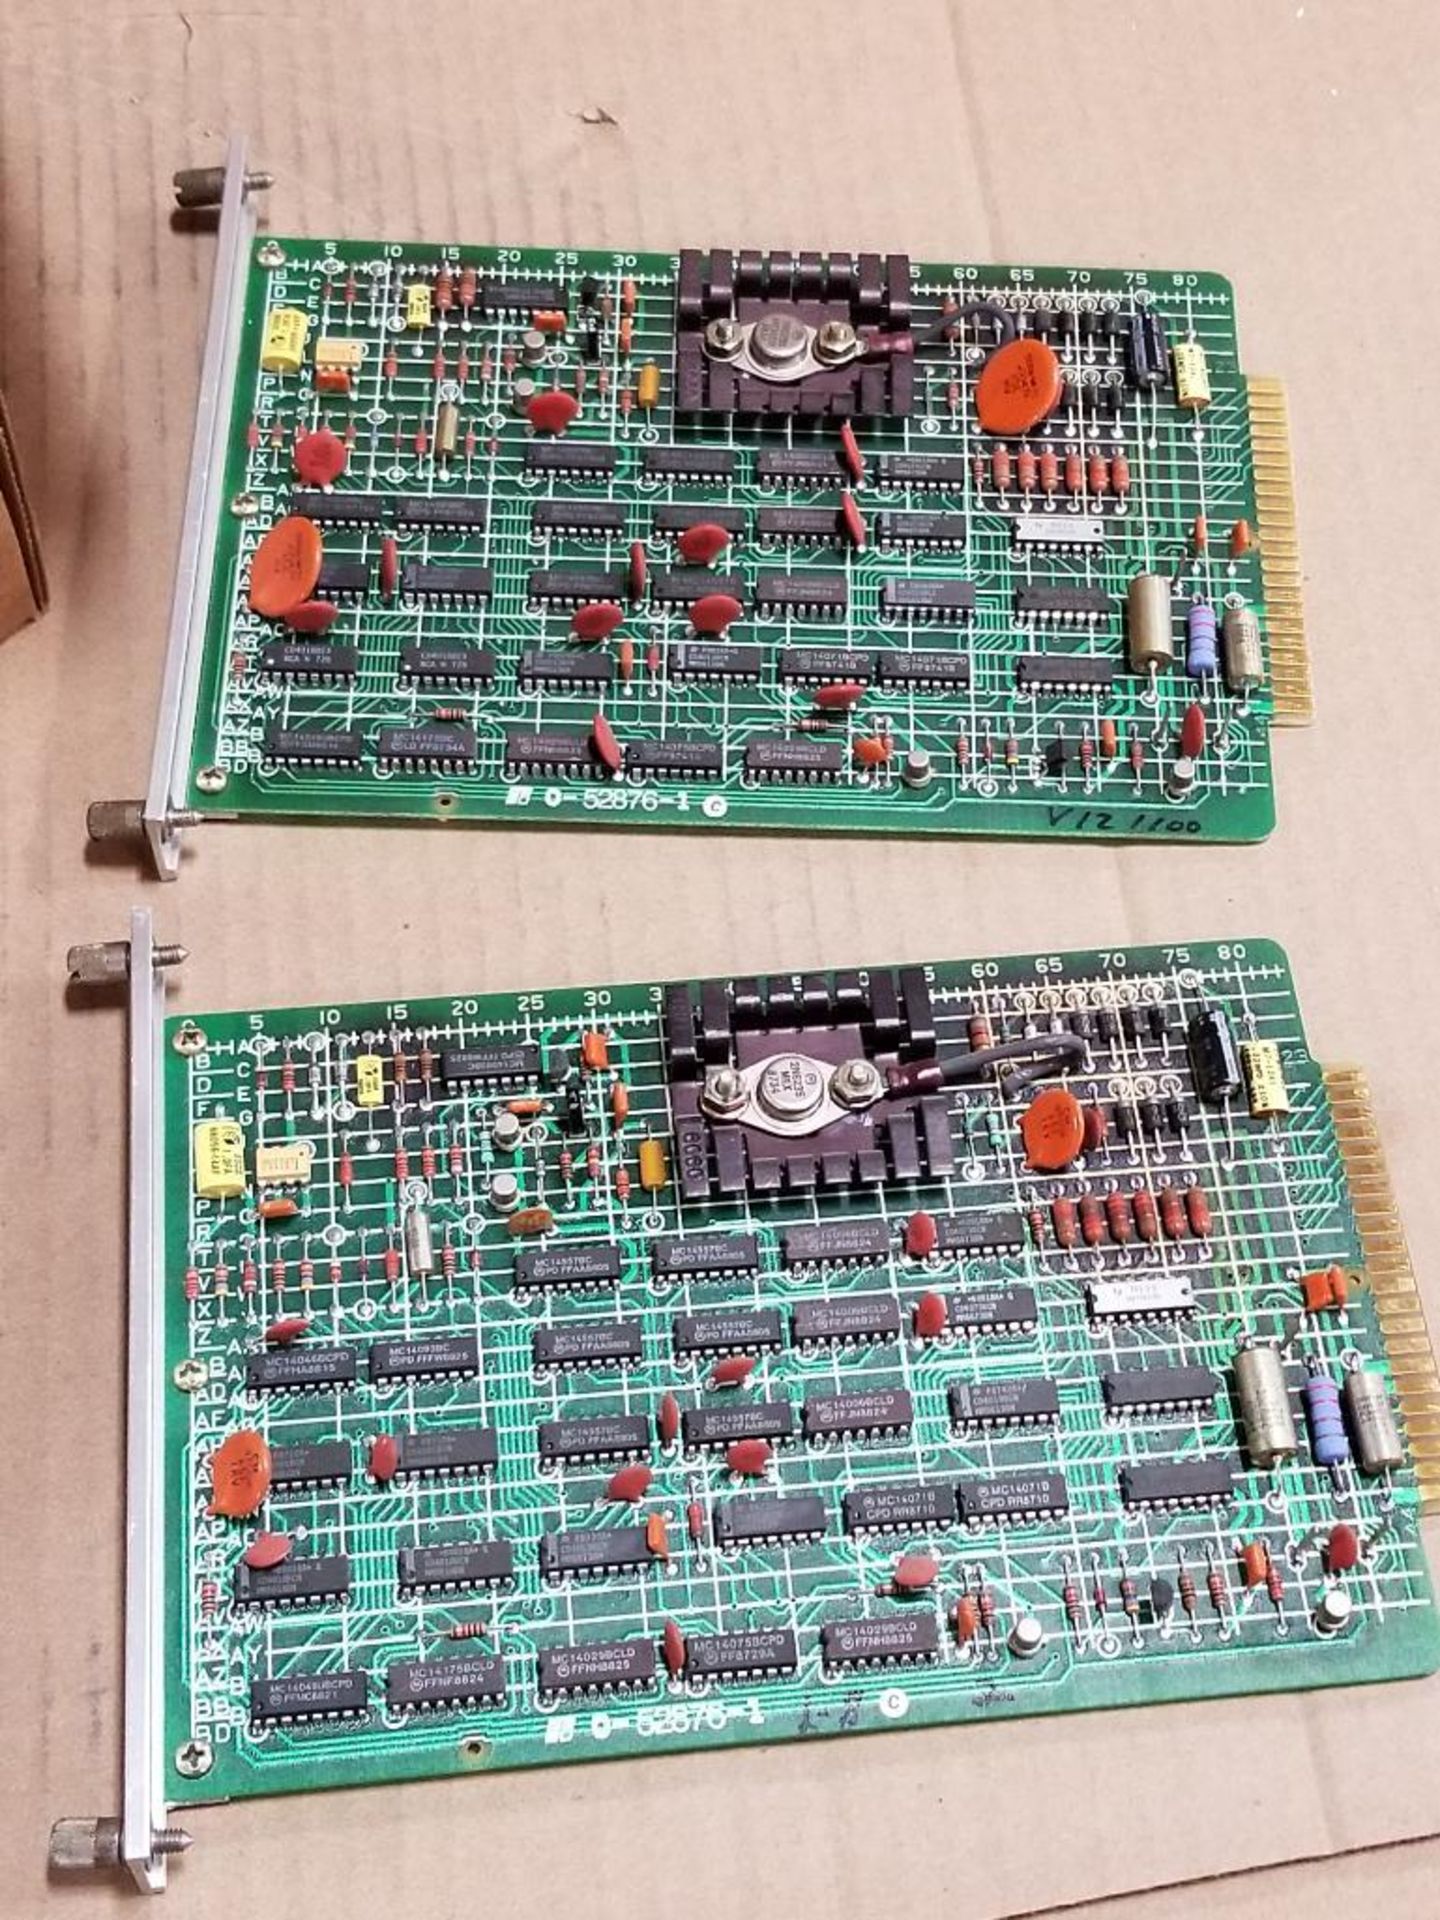 Qty 2 - Electrical boards. Reliance Electric. 0-52876-1.